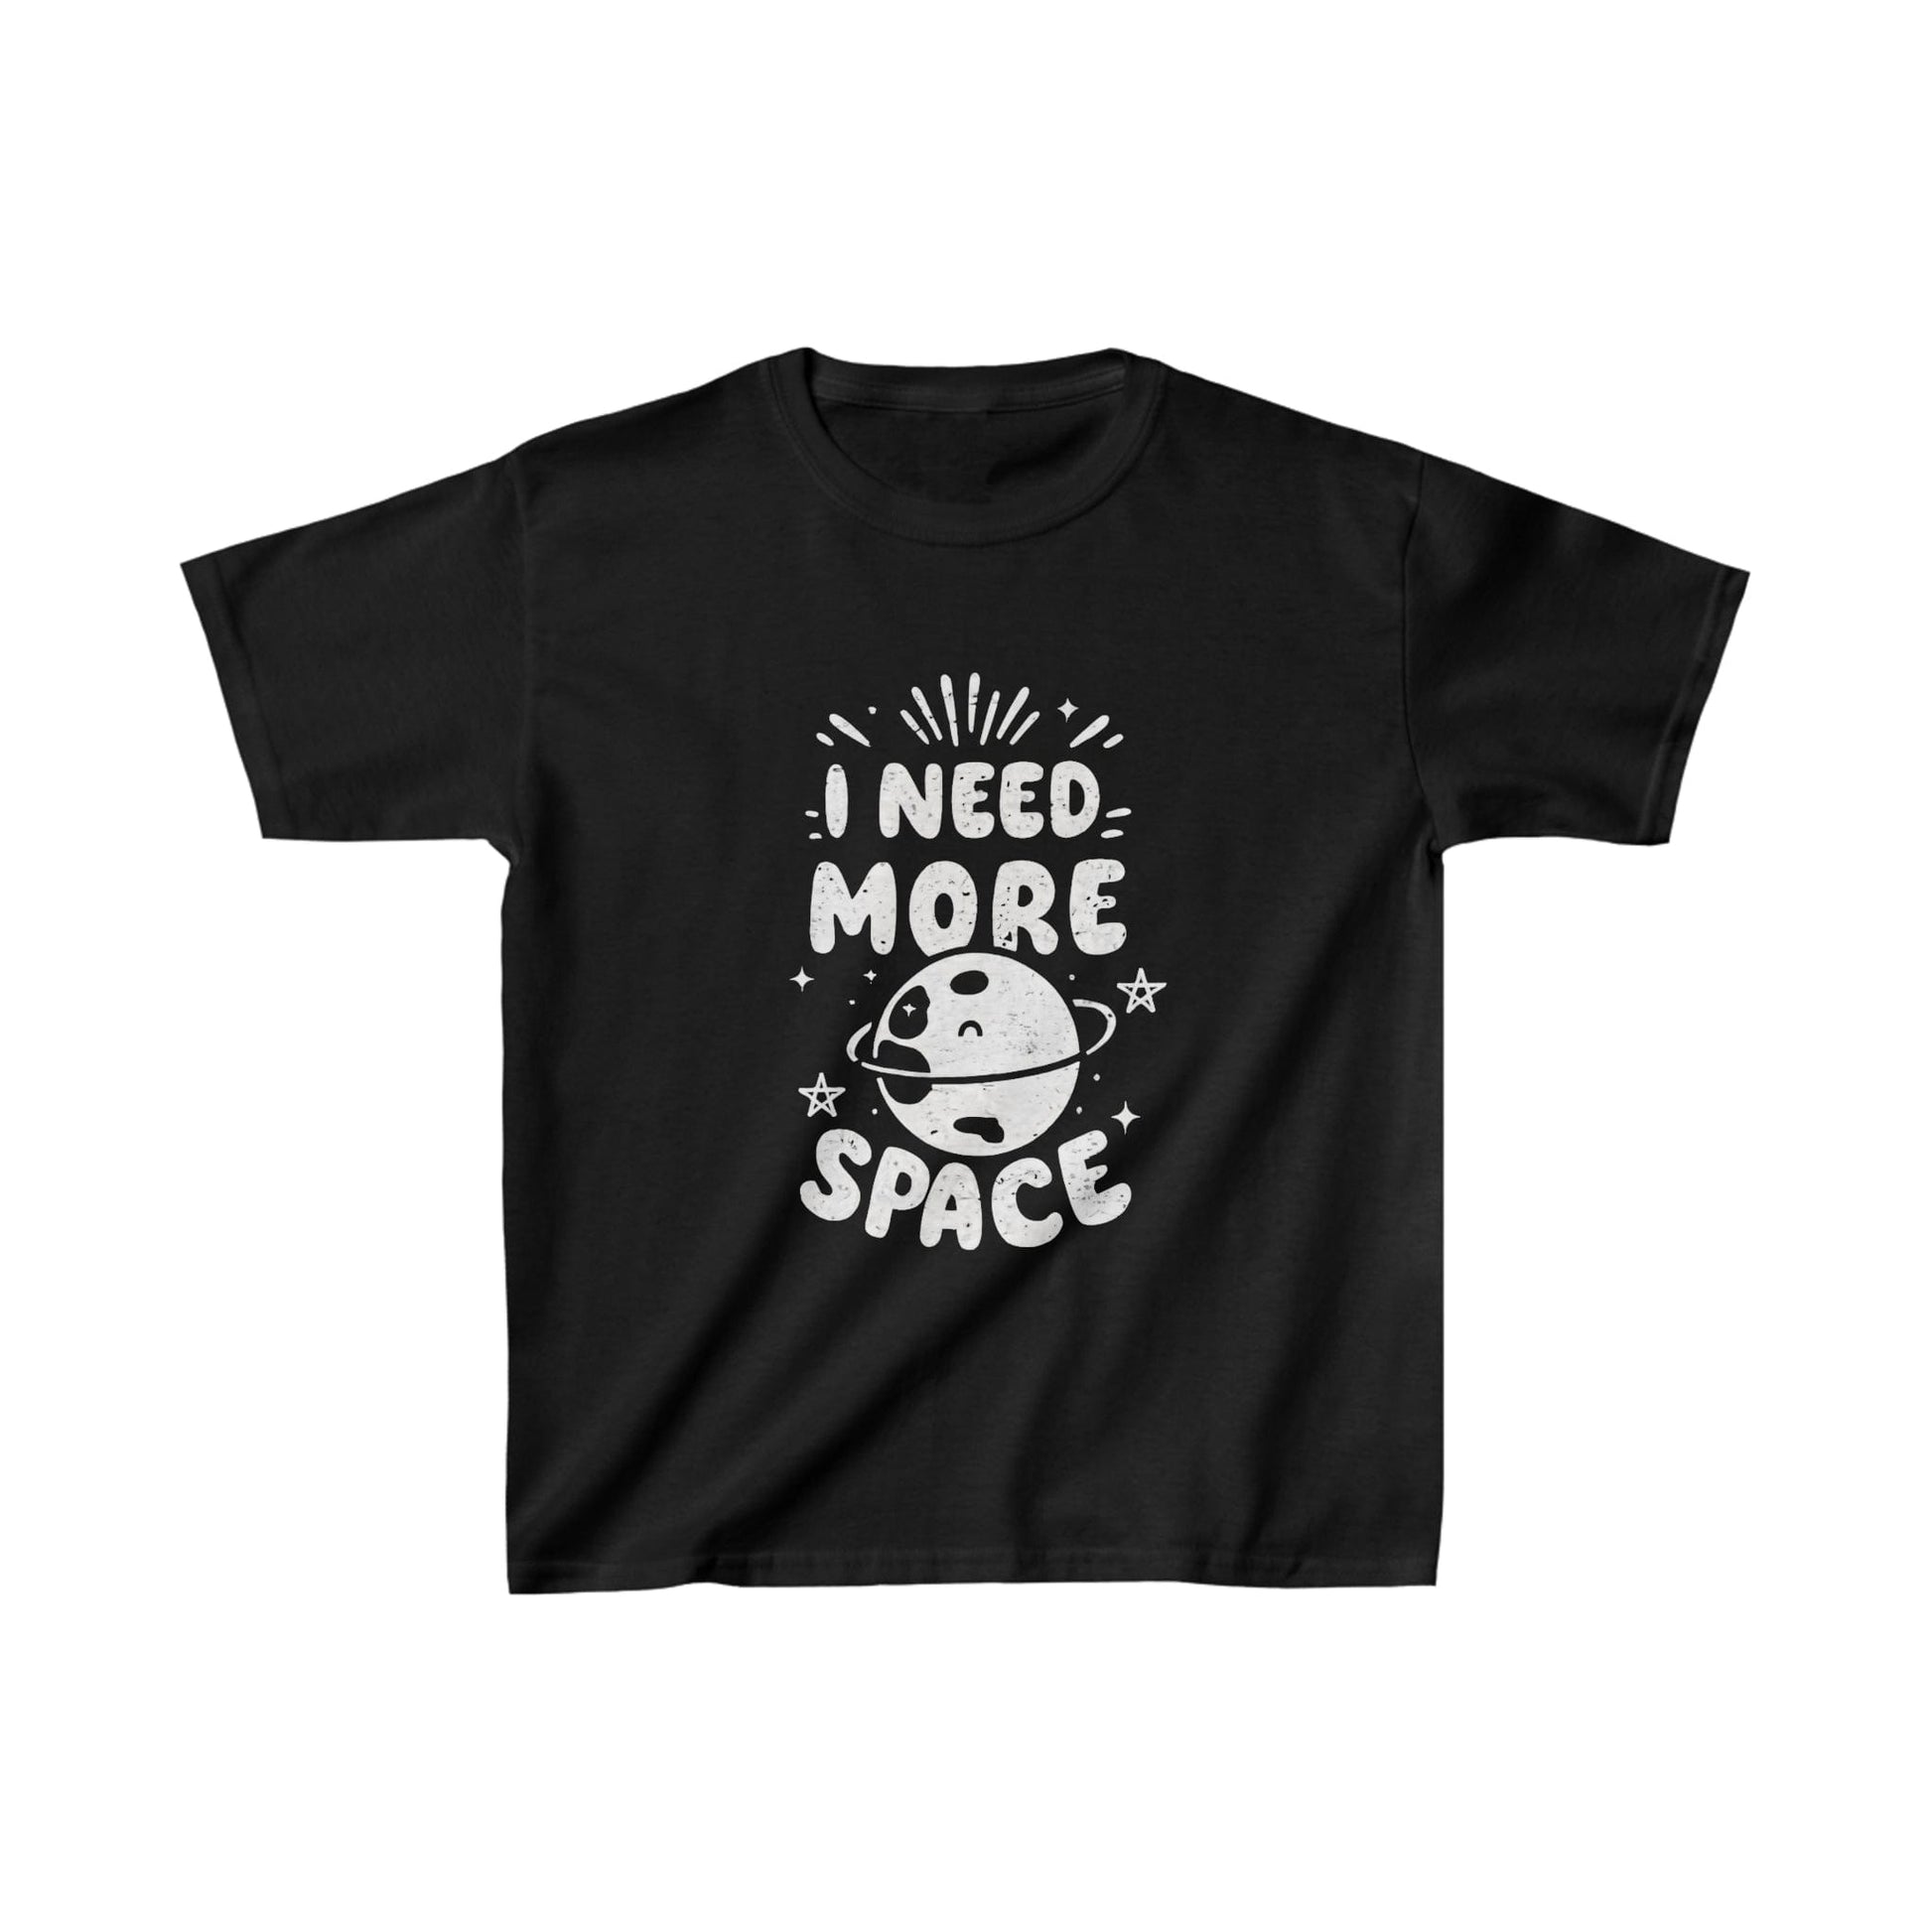 Kids clothes XS / Black Youth I Need More Space T-Shirt